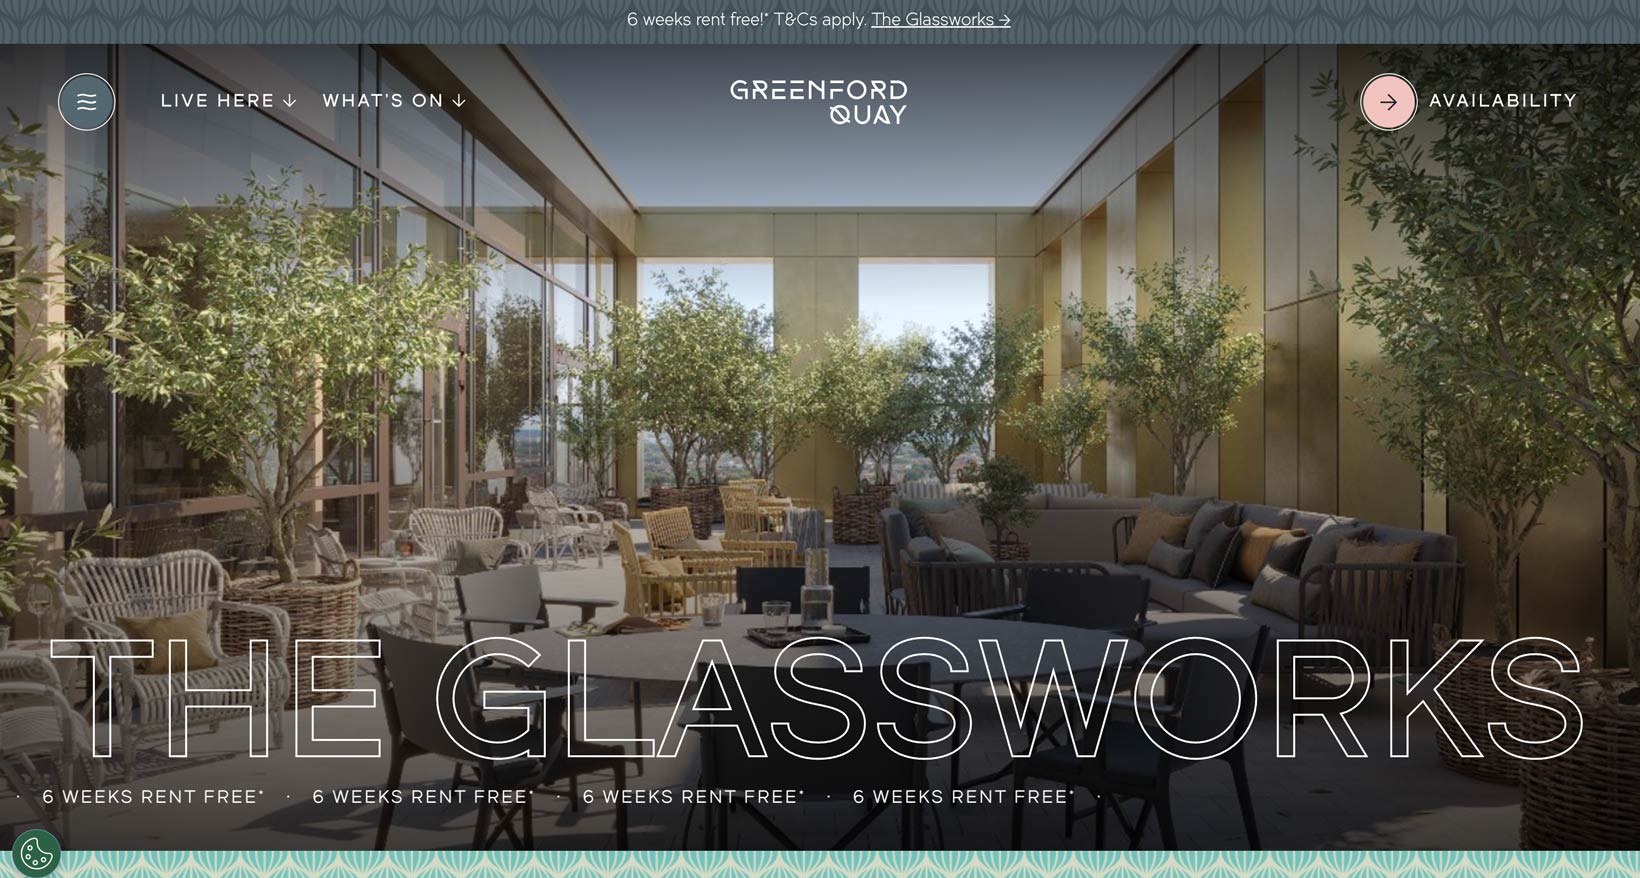 Just launched - The Glassworks